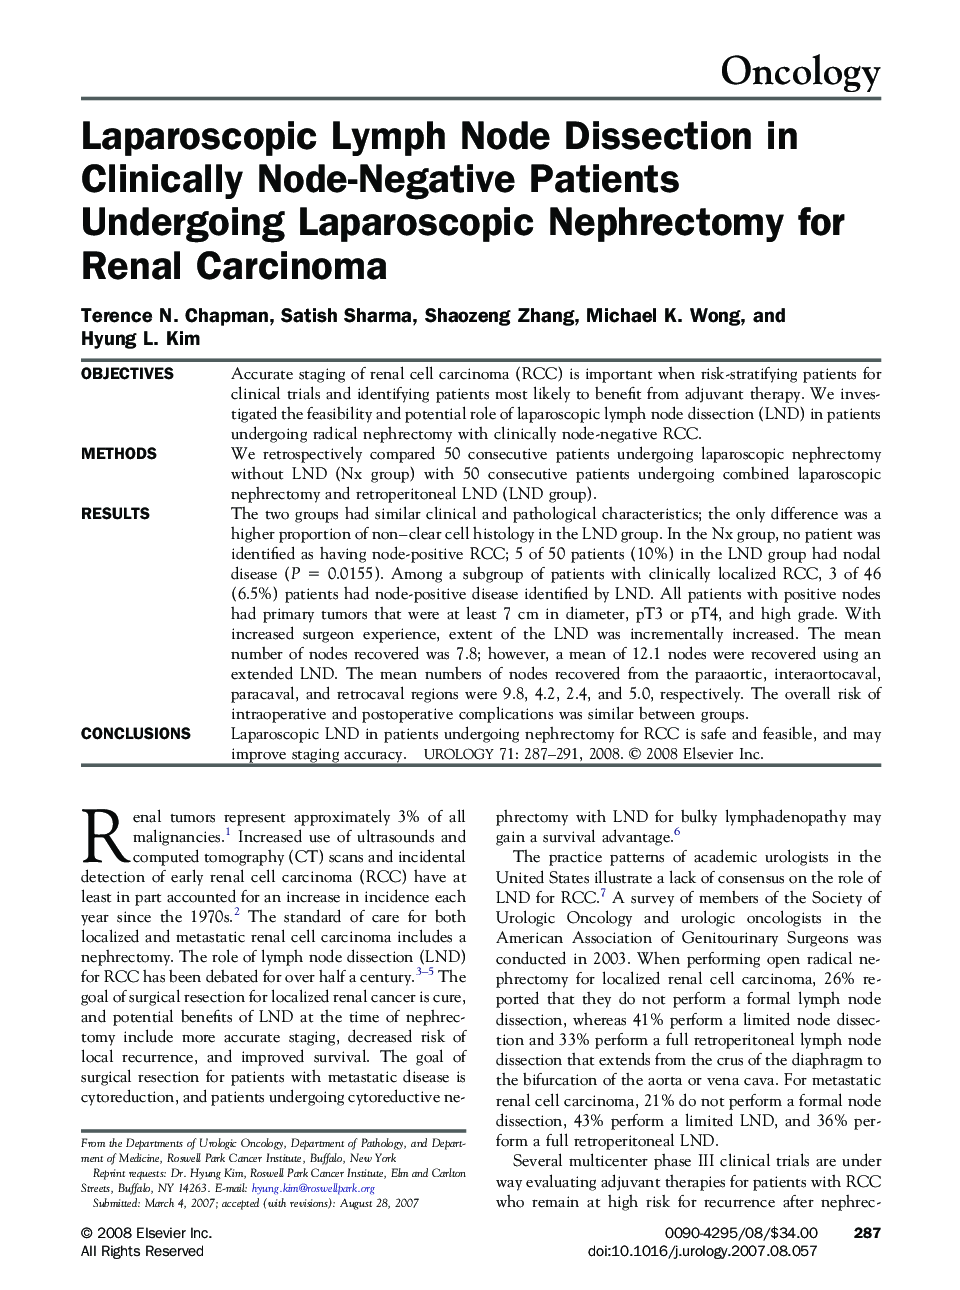 Laparoscopic Lymph Node Dissection in Clinically Node-Negative Patients Undergoing Laparoscopic Nephrectomy for Renal Carcinoma